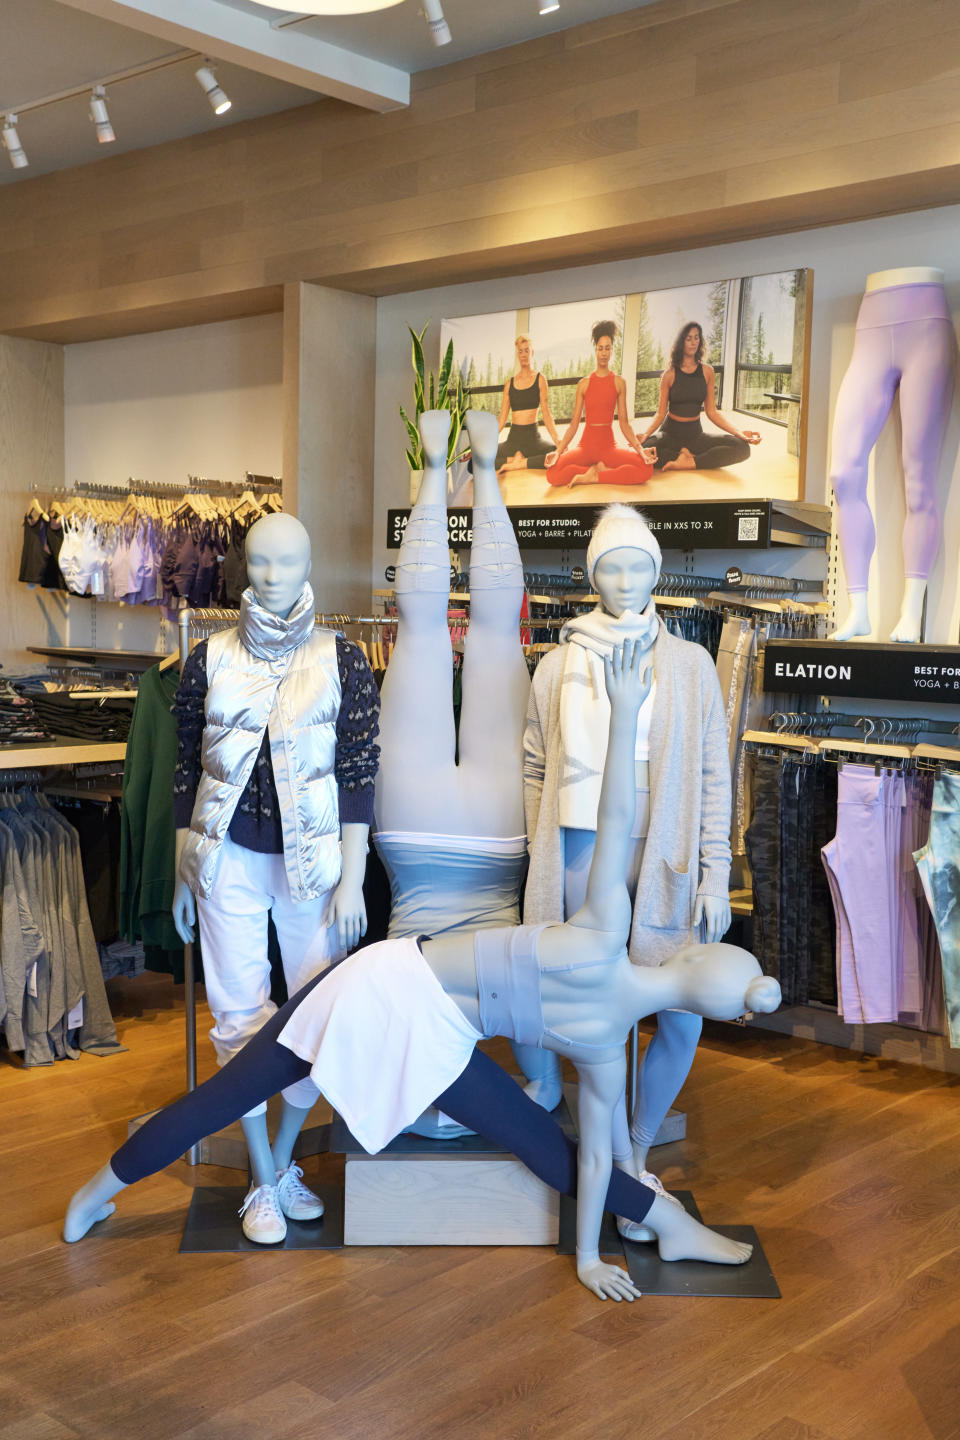 Athleta sells women’s activewear and athletic accessories.